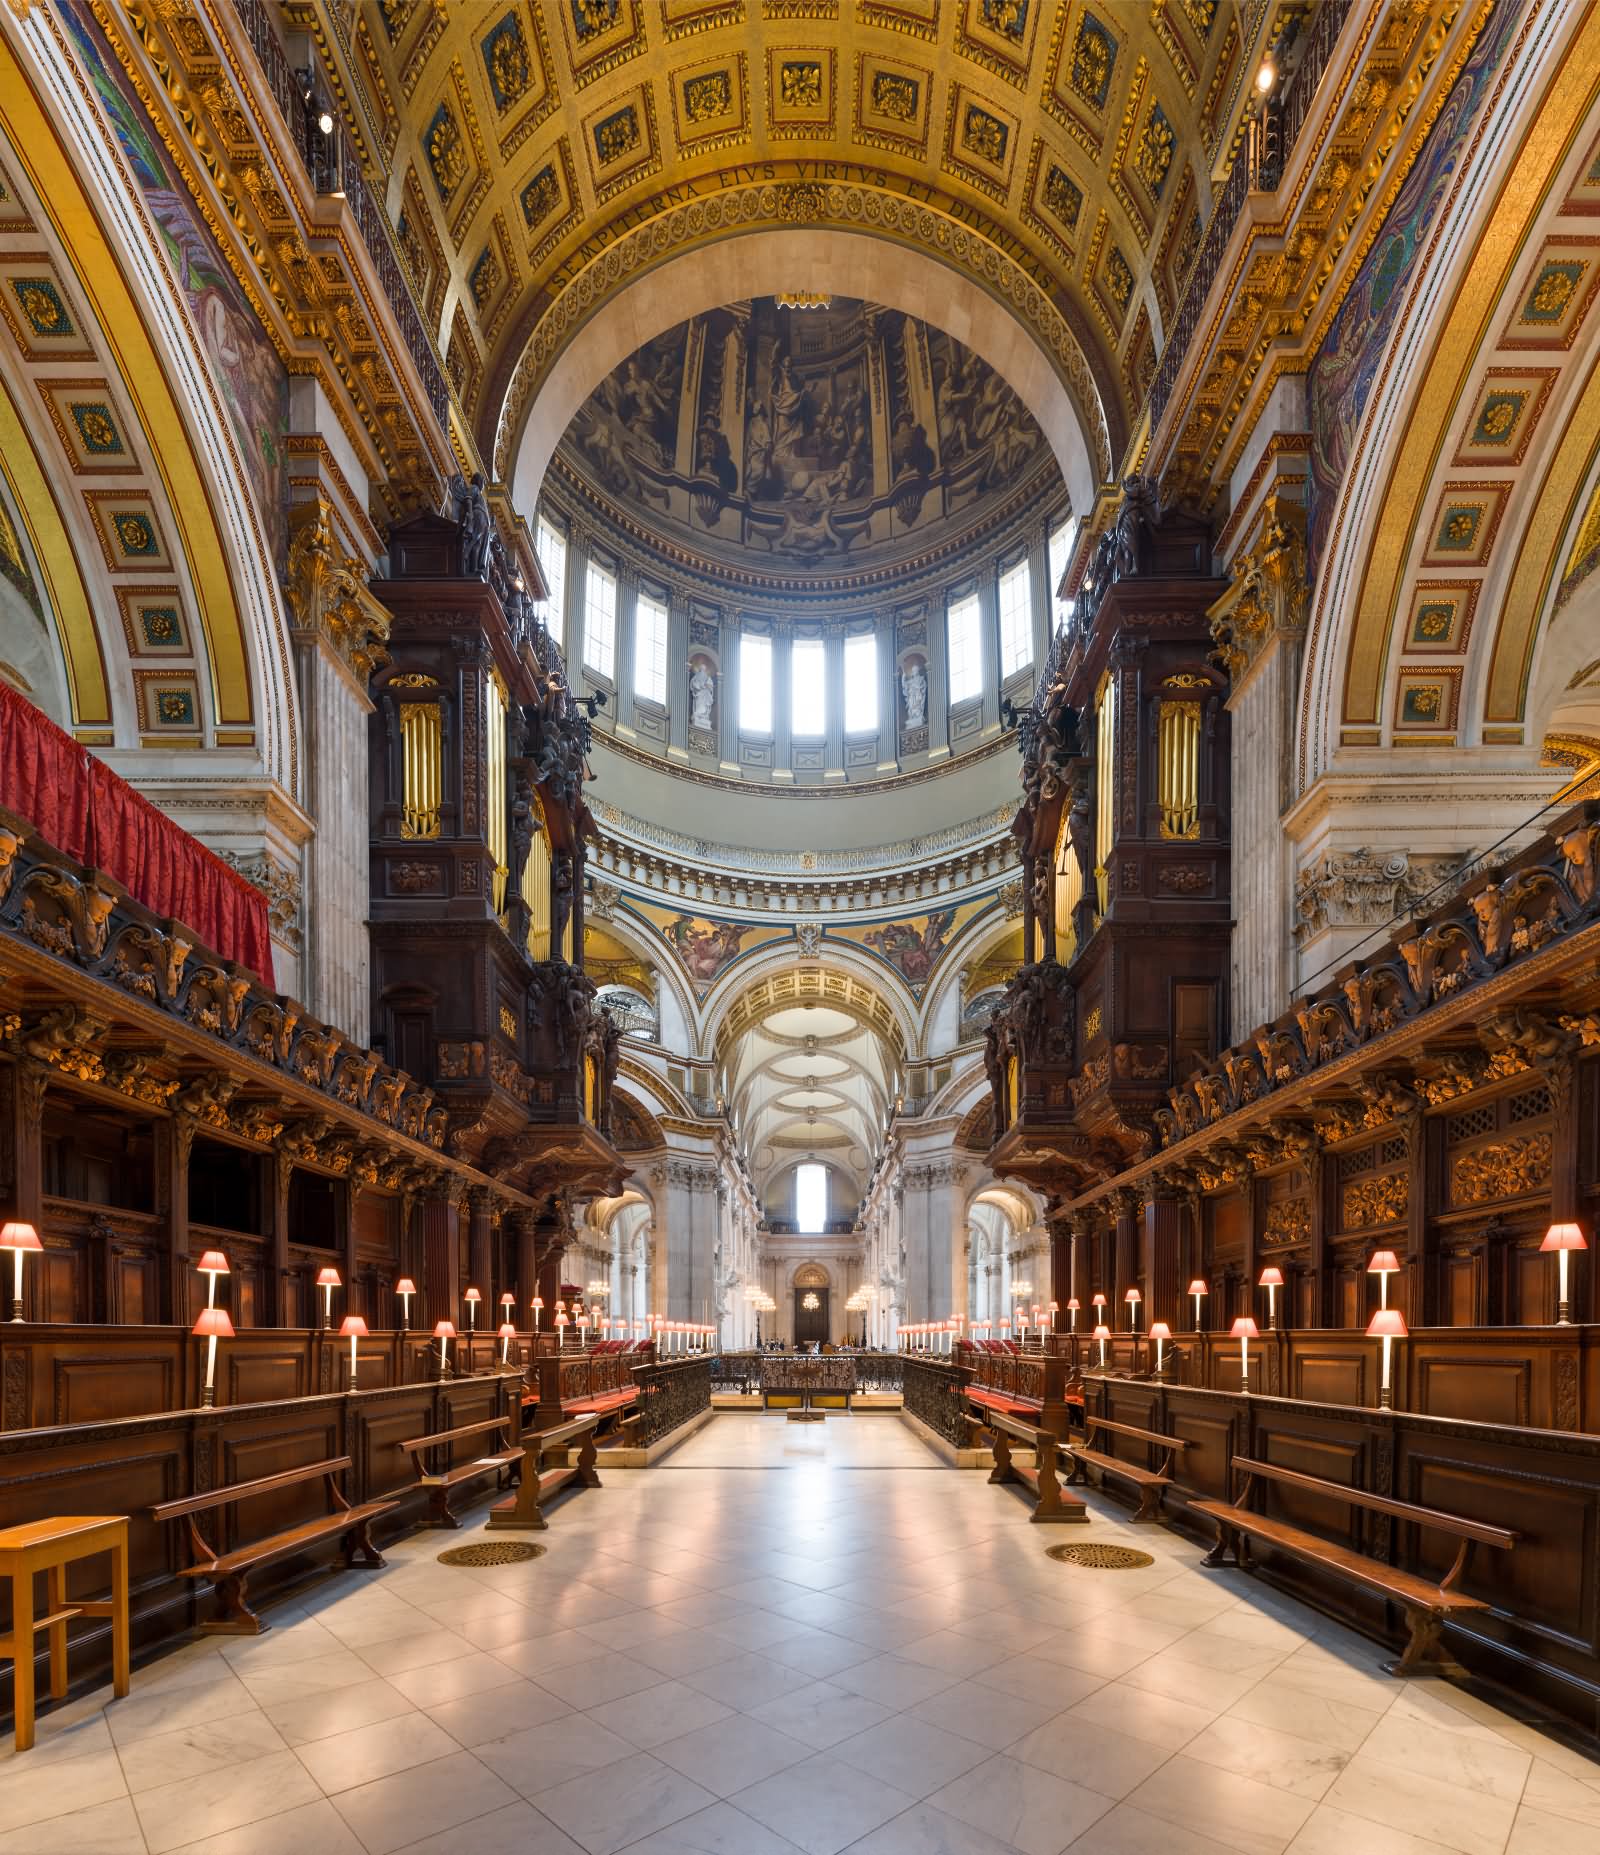 Choir Inside The St Paul's Cathedral